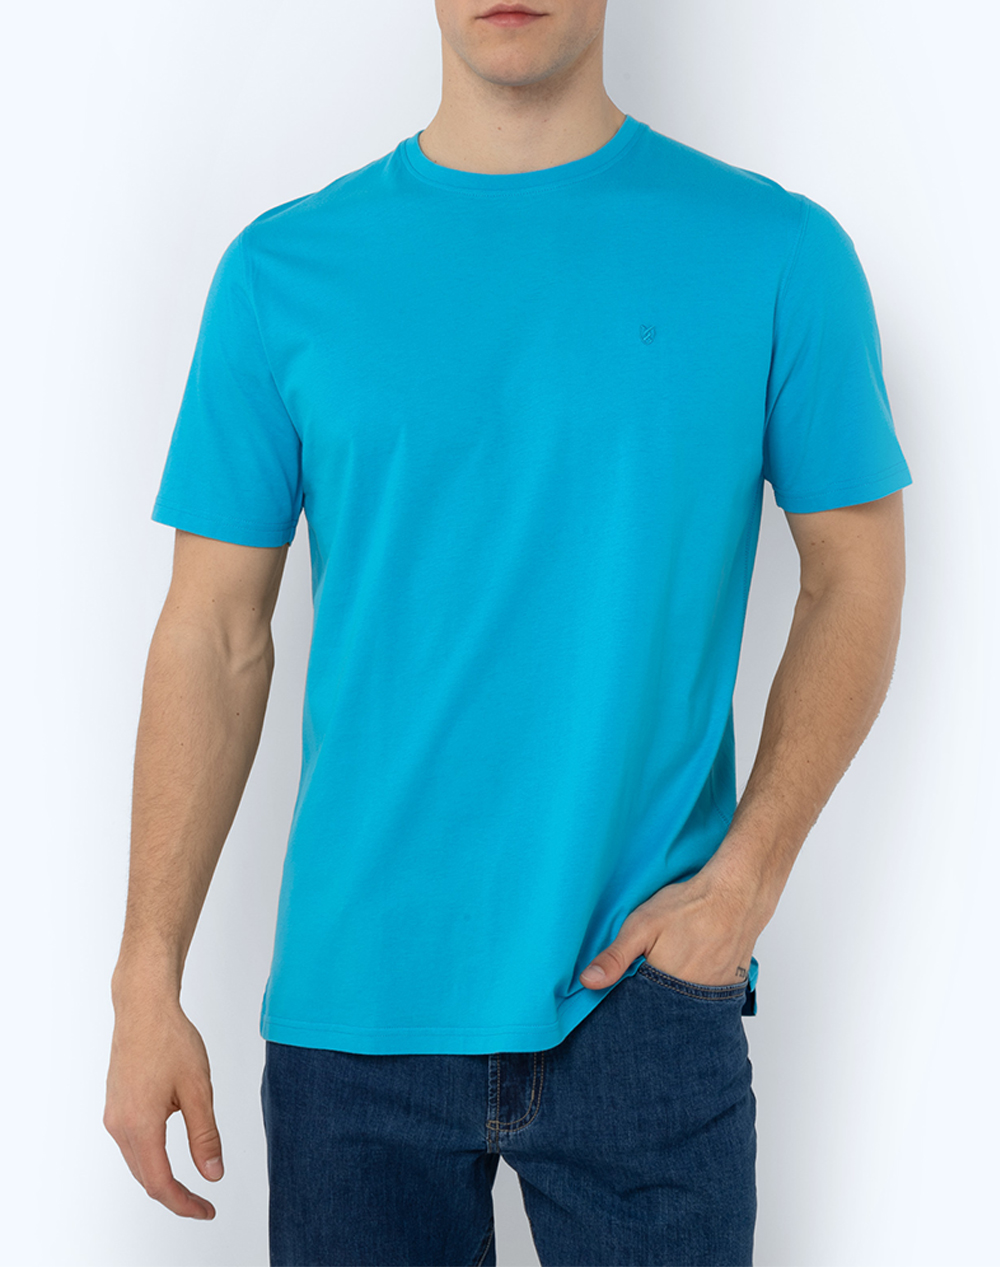 THE BOSTONIANS ΜΠΛΟΥΖΑ ESSENTIAL T-SHIRT REGULAR FIT 3TS1241-TURQUOISE Turquoise 3820ABOST3400141_10929